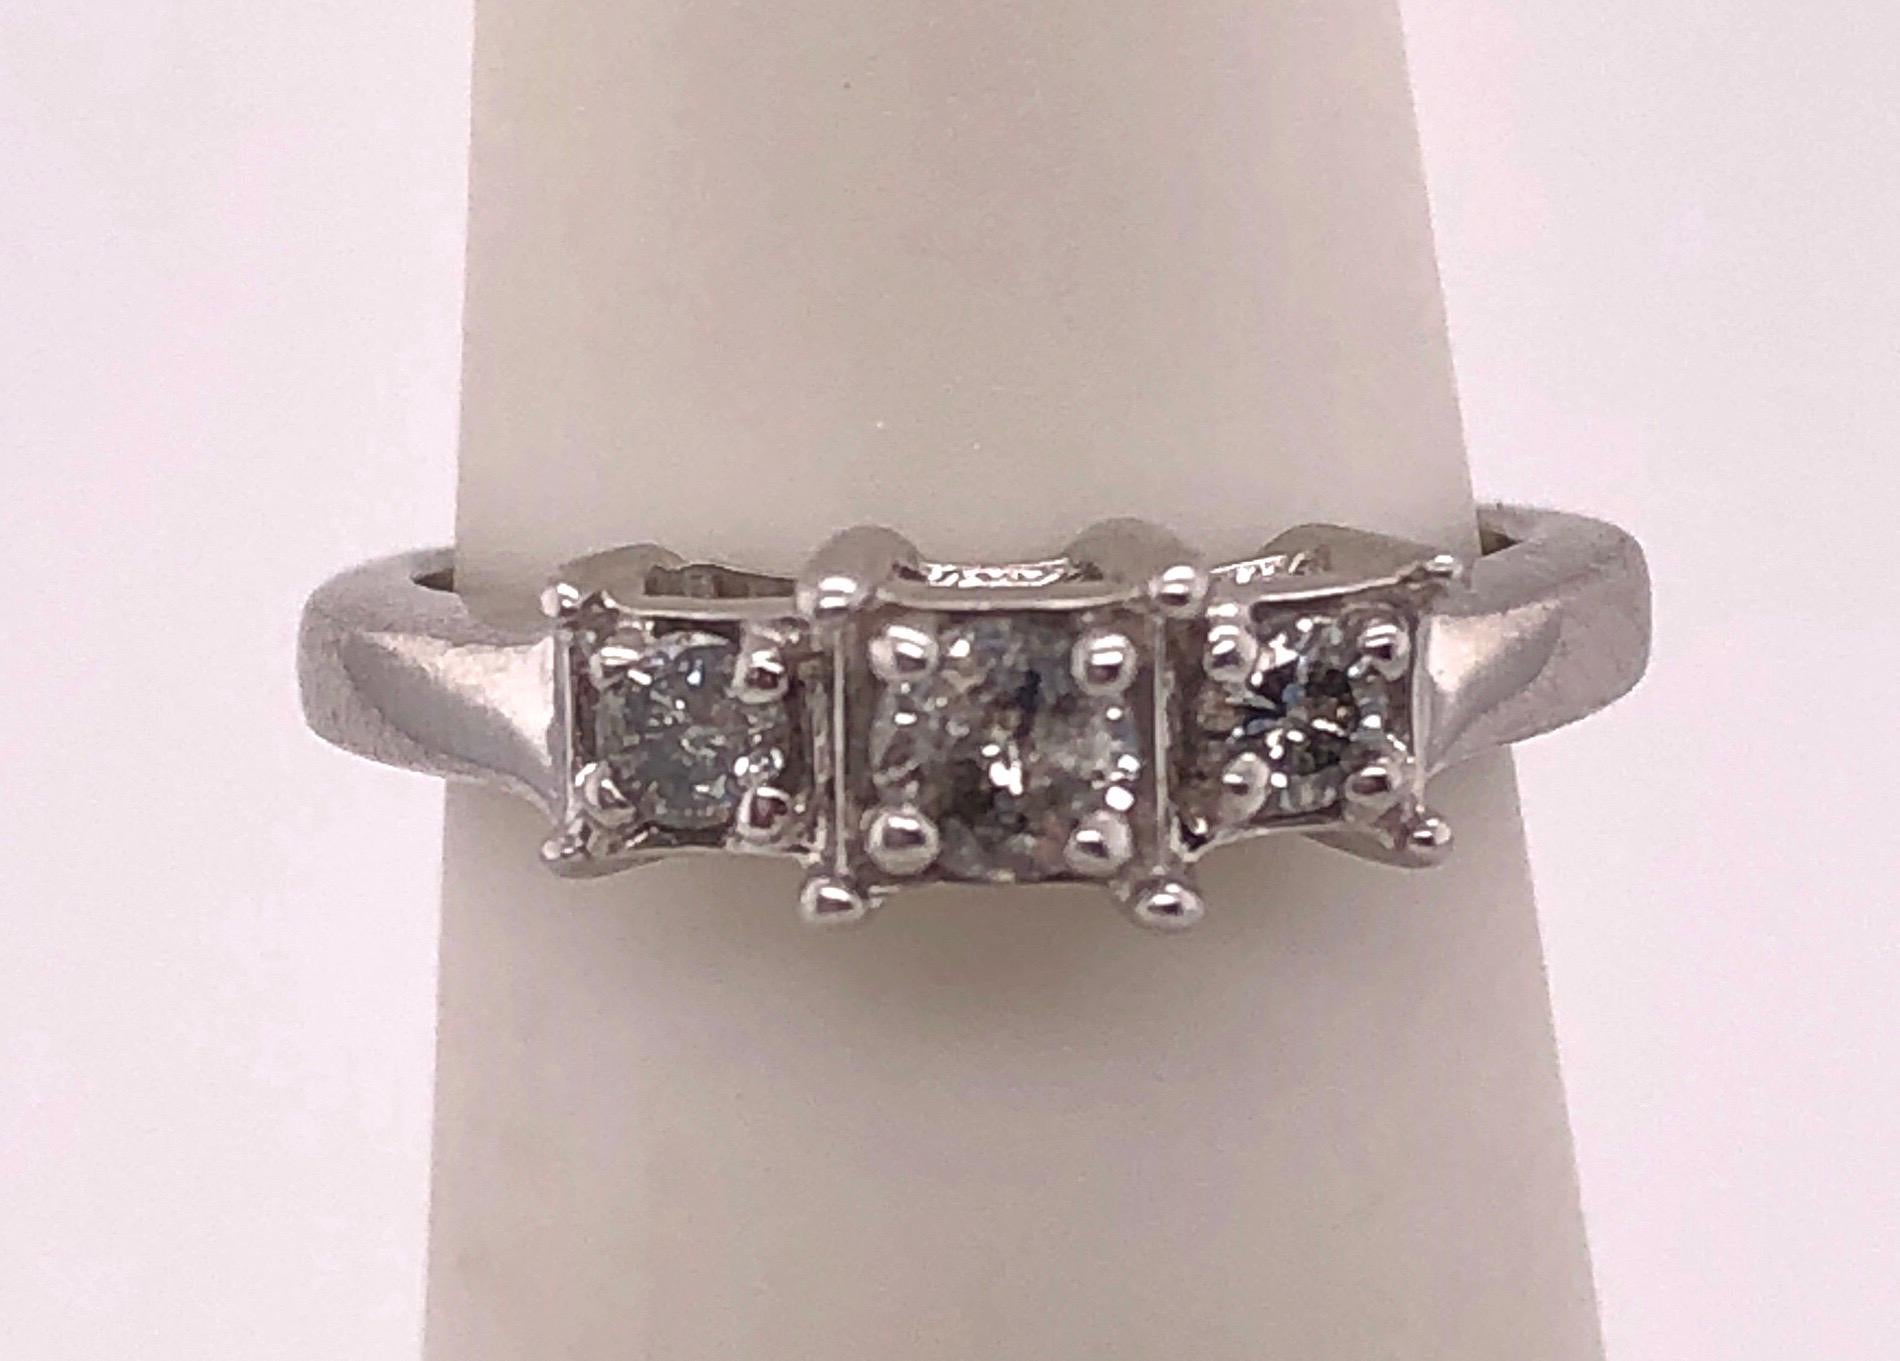 14Kt White Gold Engagement Ring/Band Ring 0.78 Total Diamond Weight.
Size 3.75 with 2.58 grams total weight.